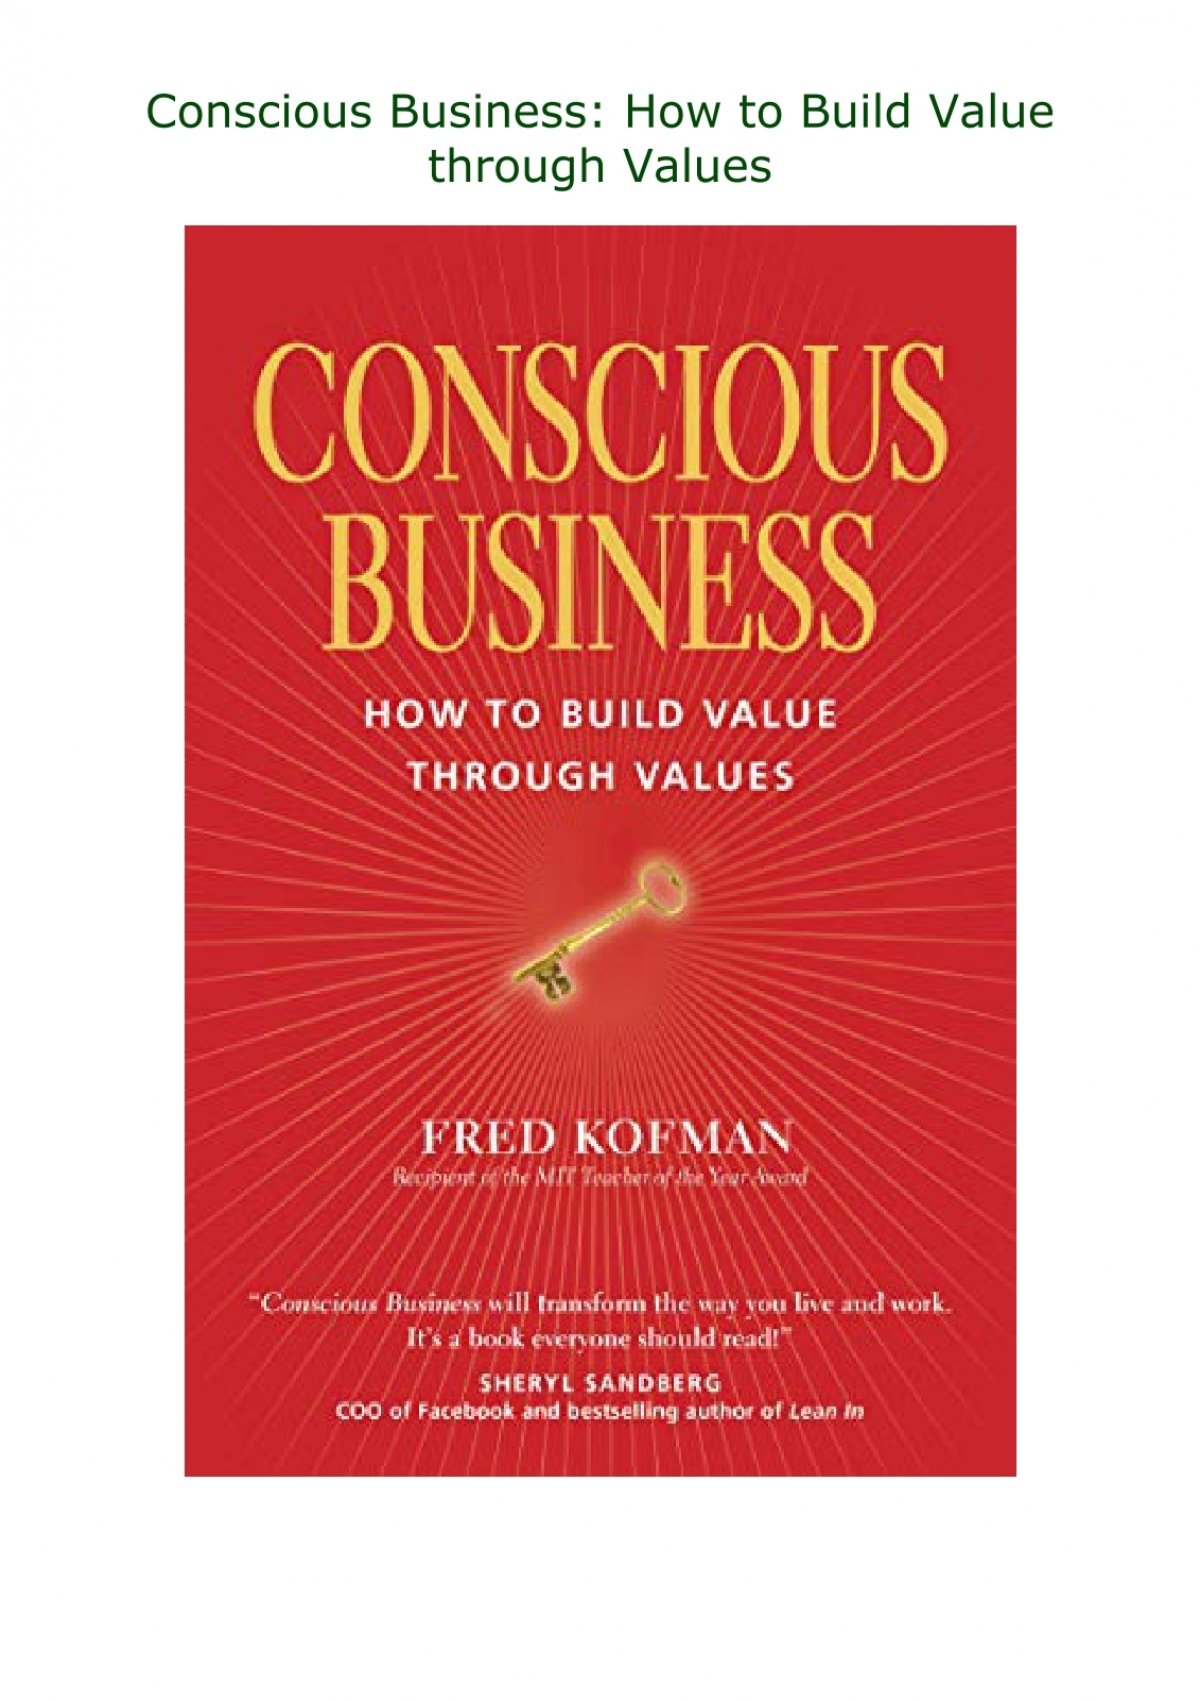 Ebook |download| Conscious Business: How to Build Value through Values